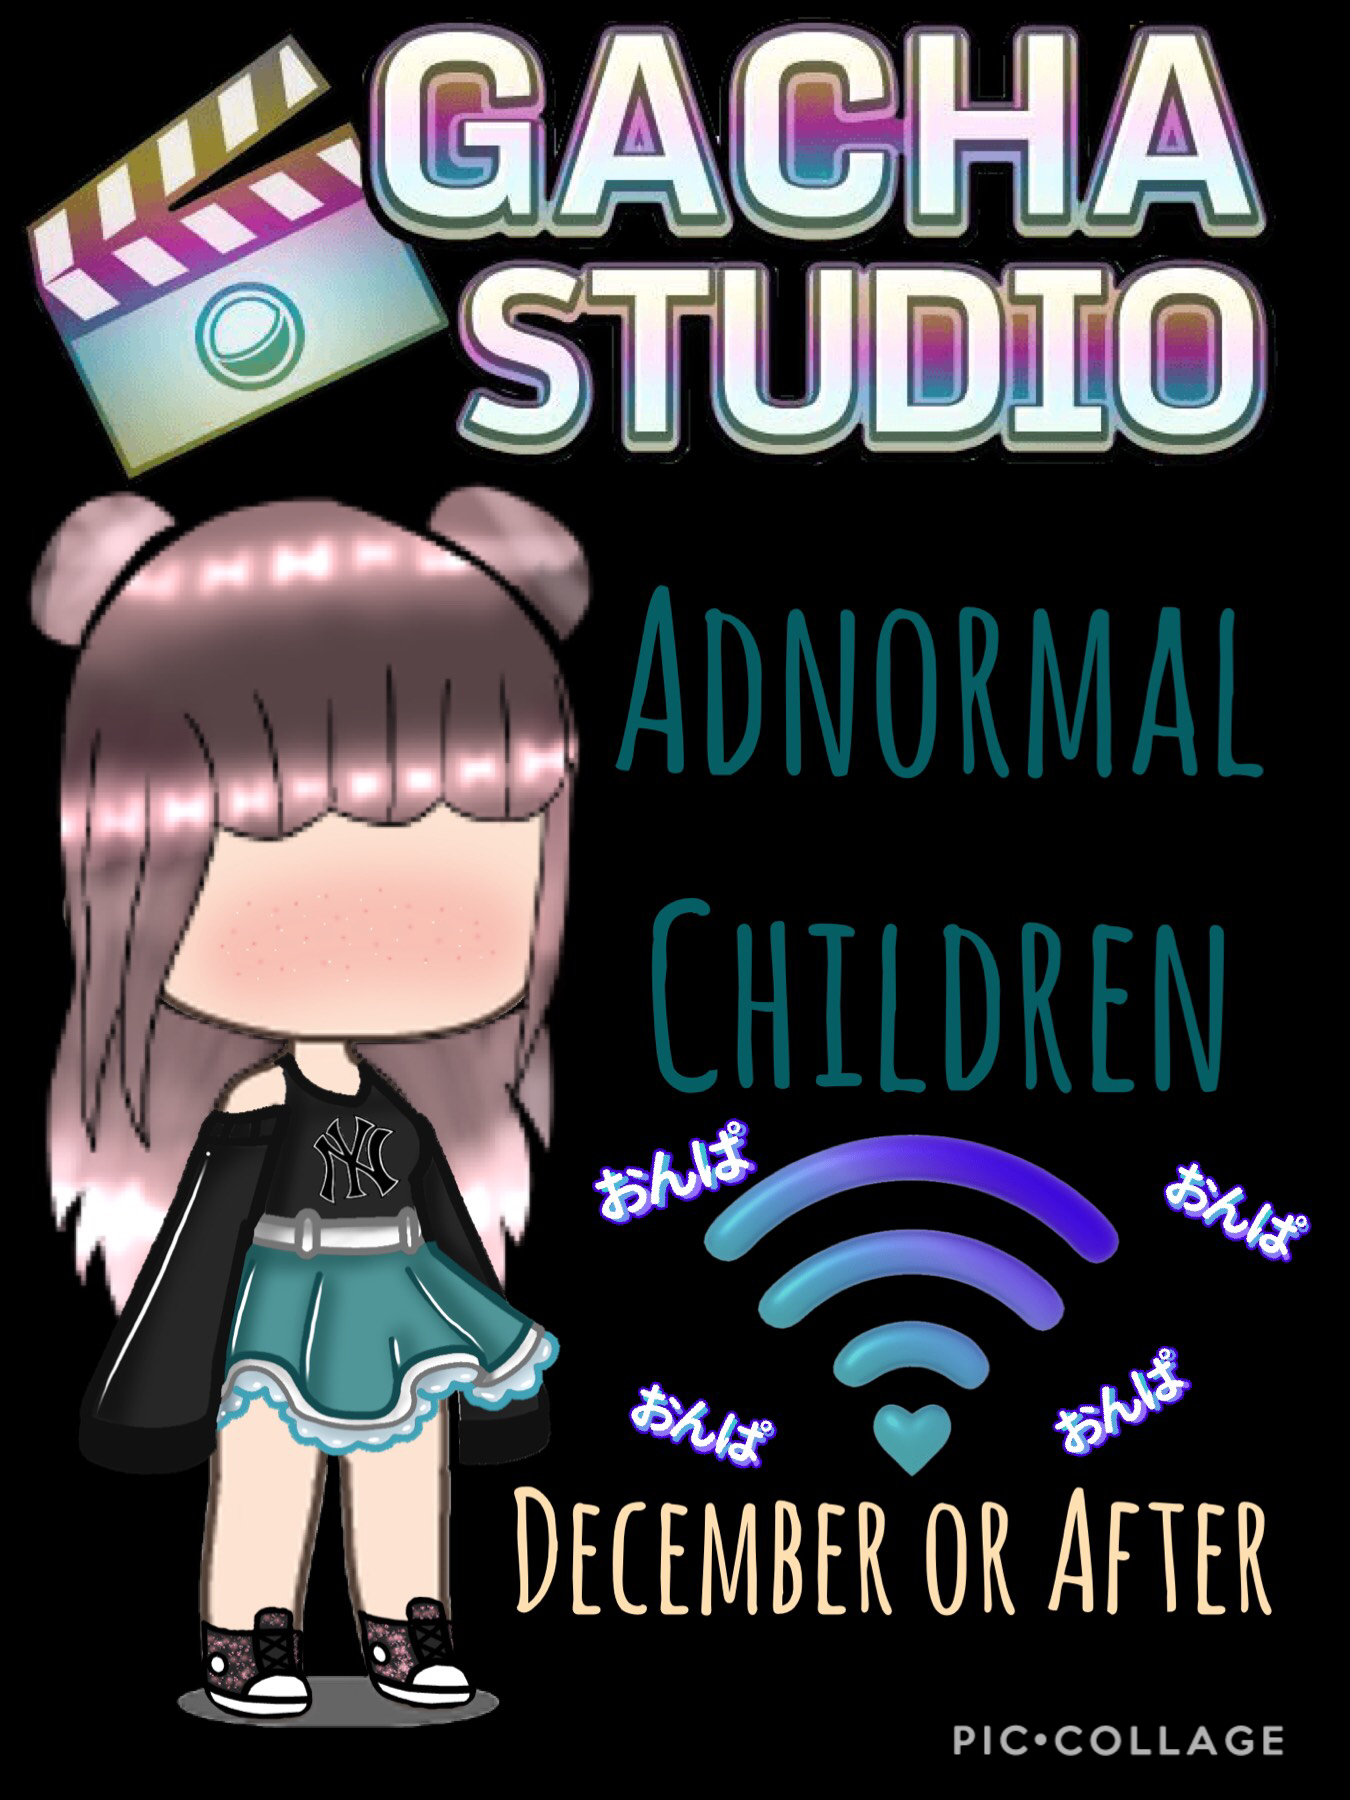 Look out on YouTube in December or after for my new Gacha series called ADNORMAL CHILDREN been waiting 3 years to release this my channel is Ashyara Guardian 